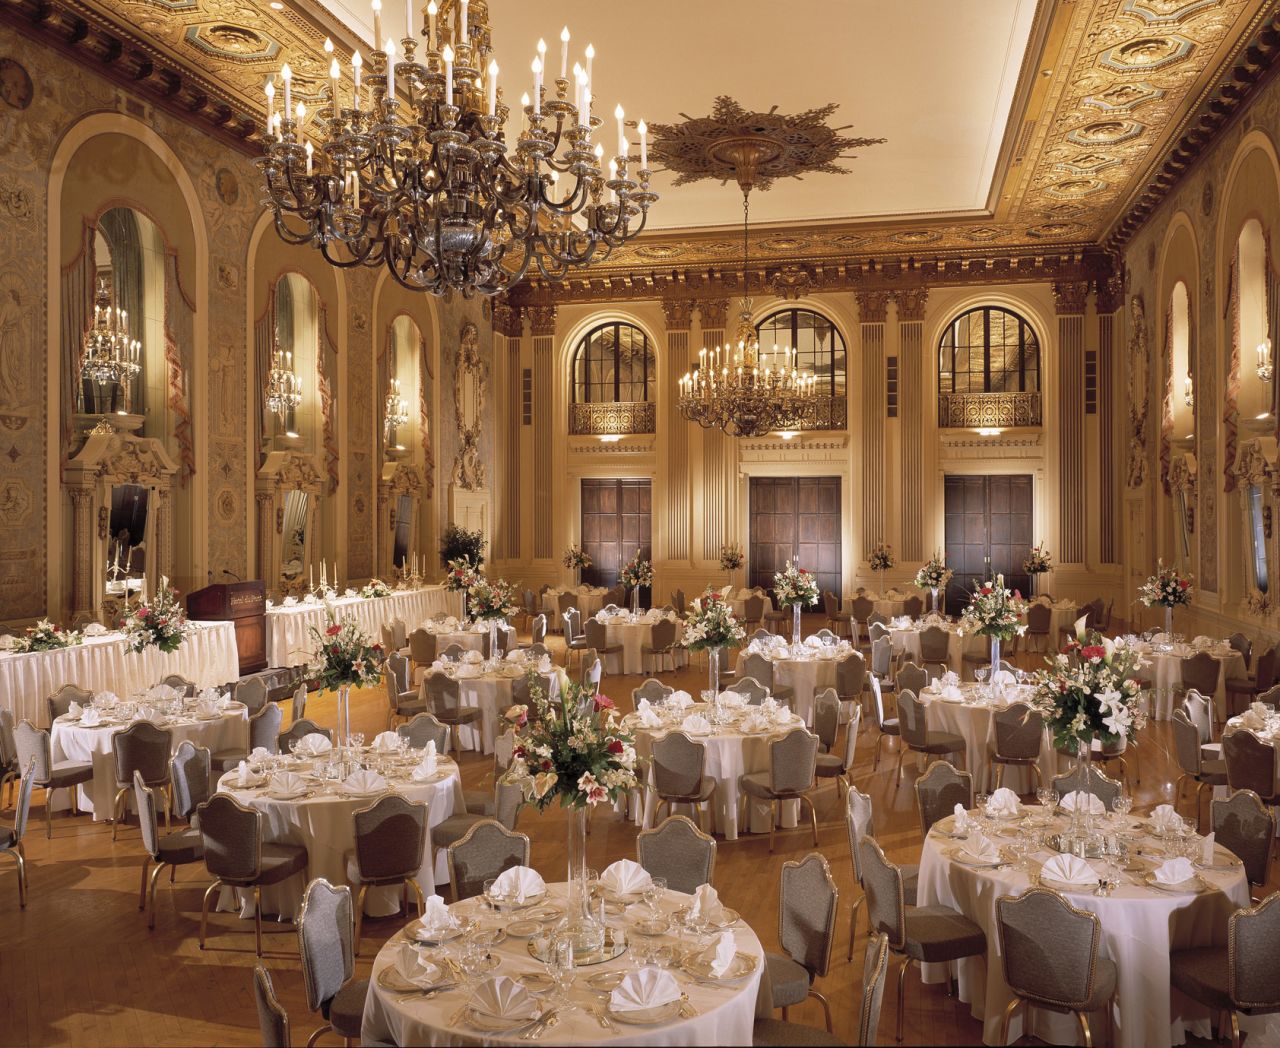 The hotel's elegant Gold Ballroom is used to host today's lavish affairs.